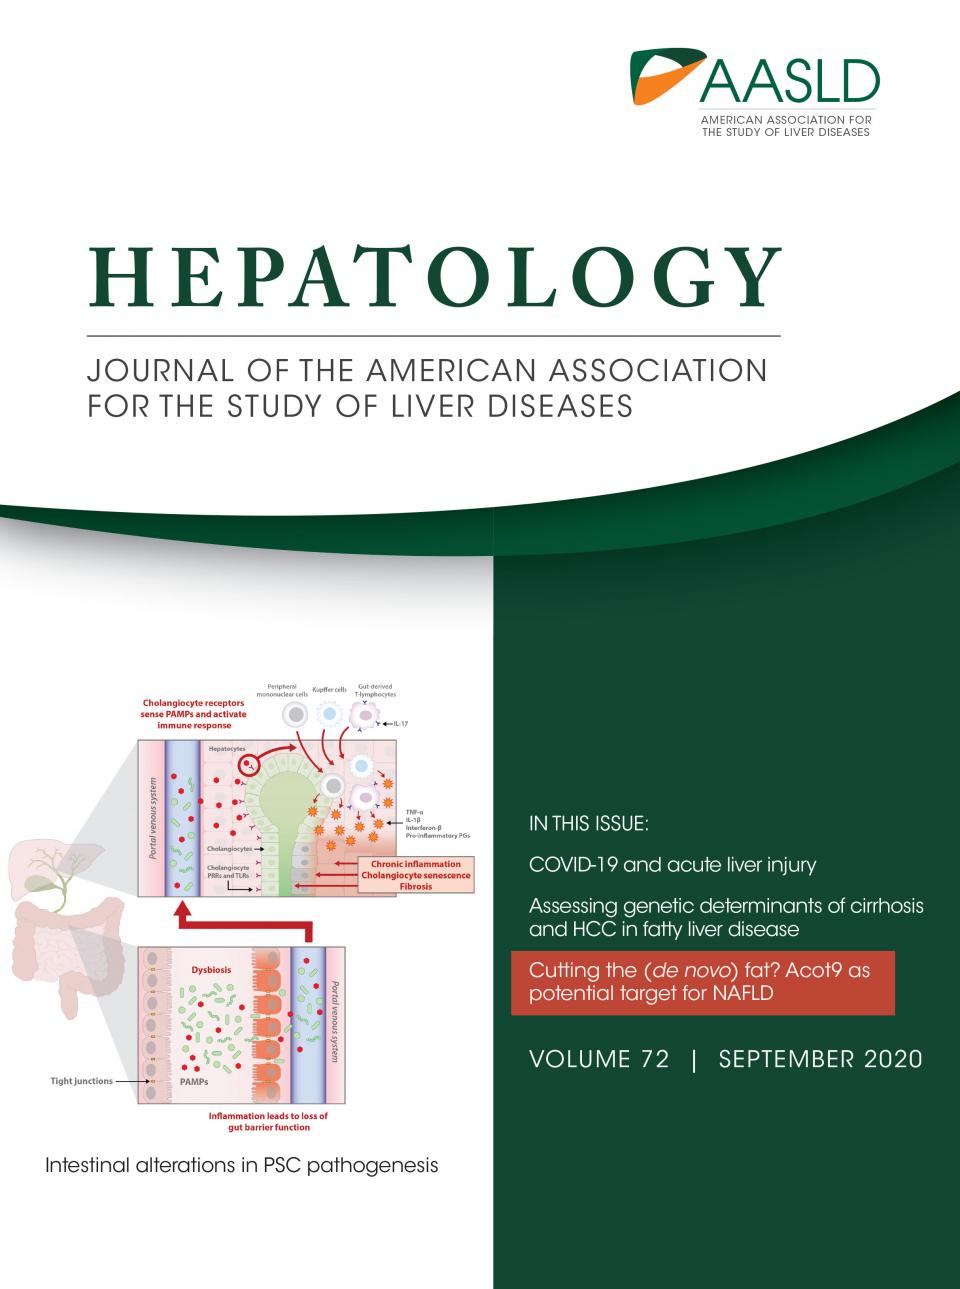 Our research is on the Hepatology cover.